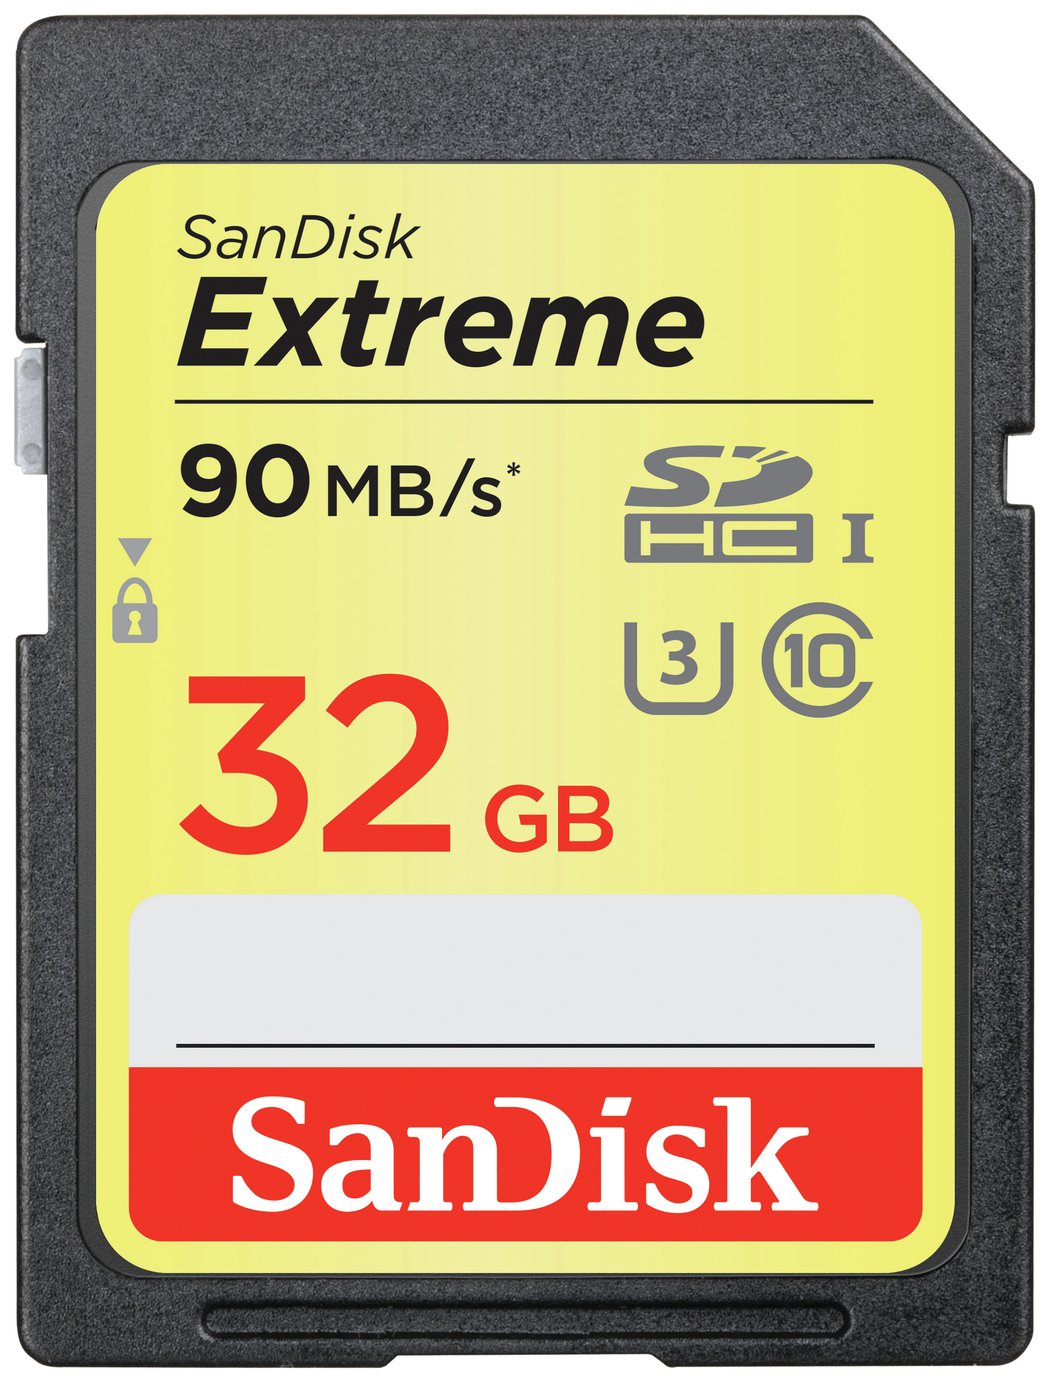 SanDisk Extreme 90MBs SD 4K Ready Memory Card Review